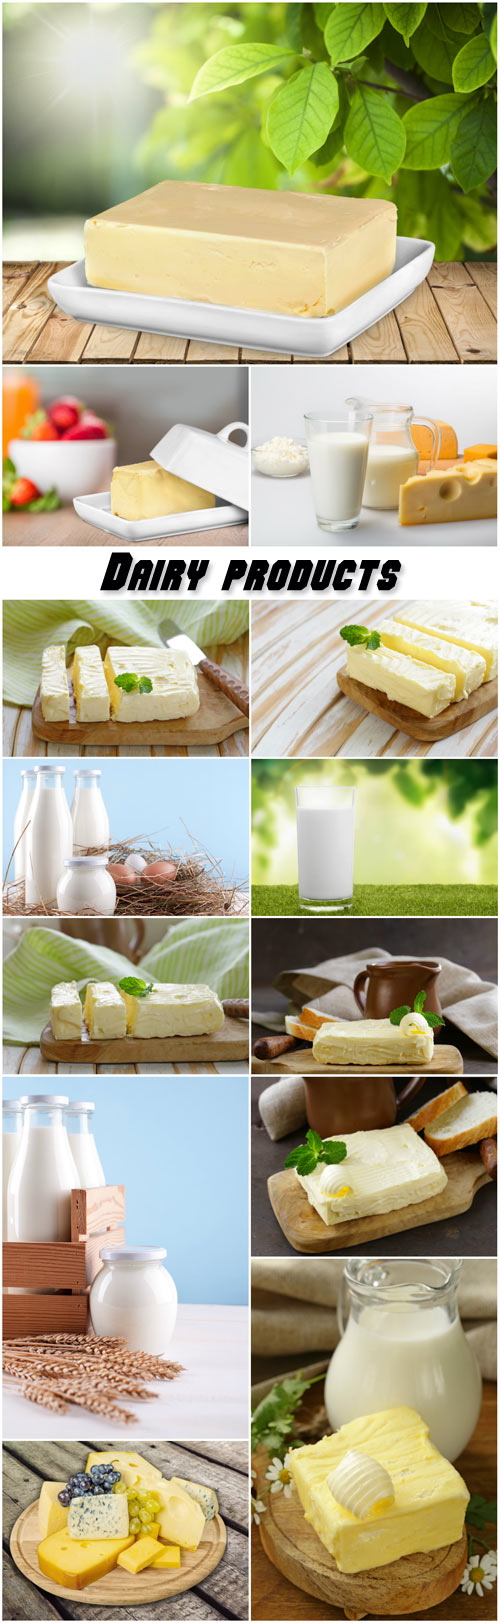 Dairy products, butter, milk, cheese